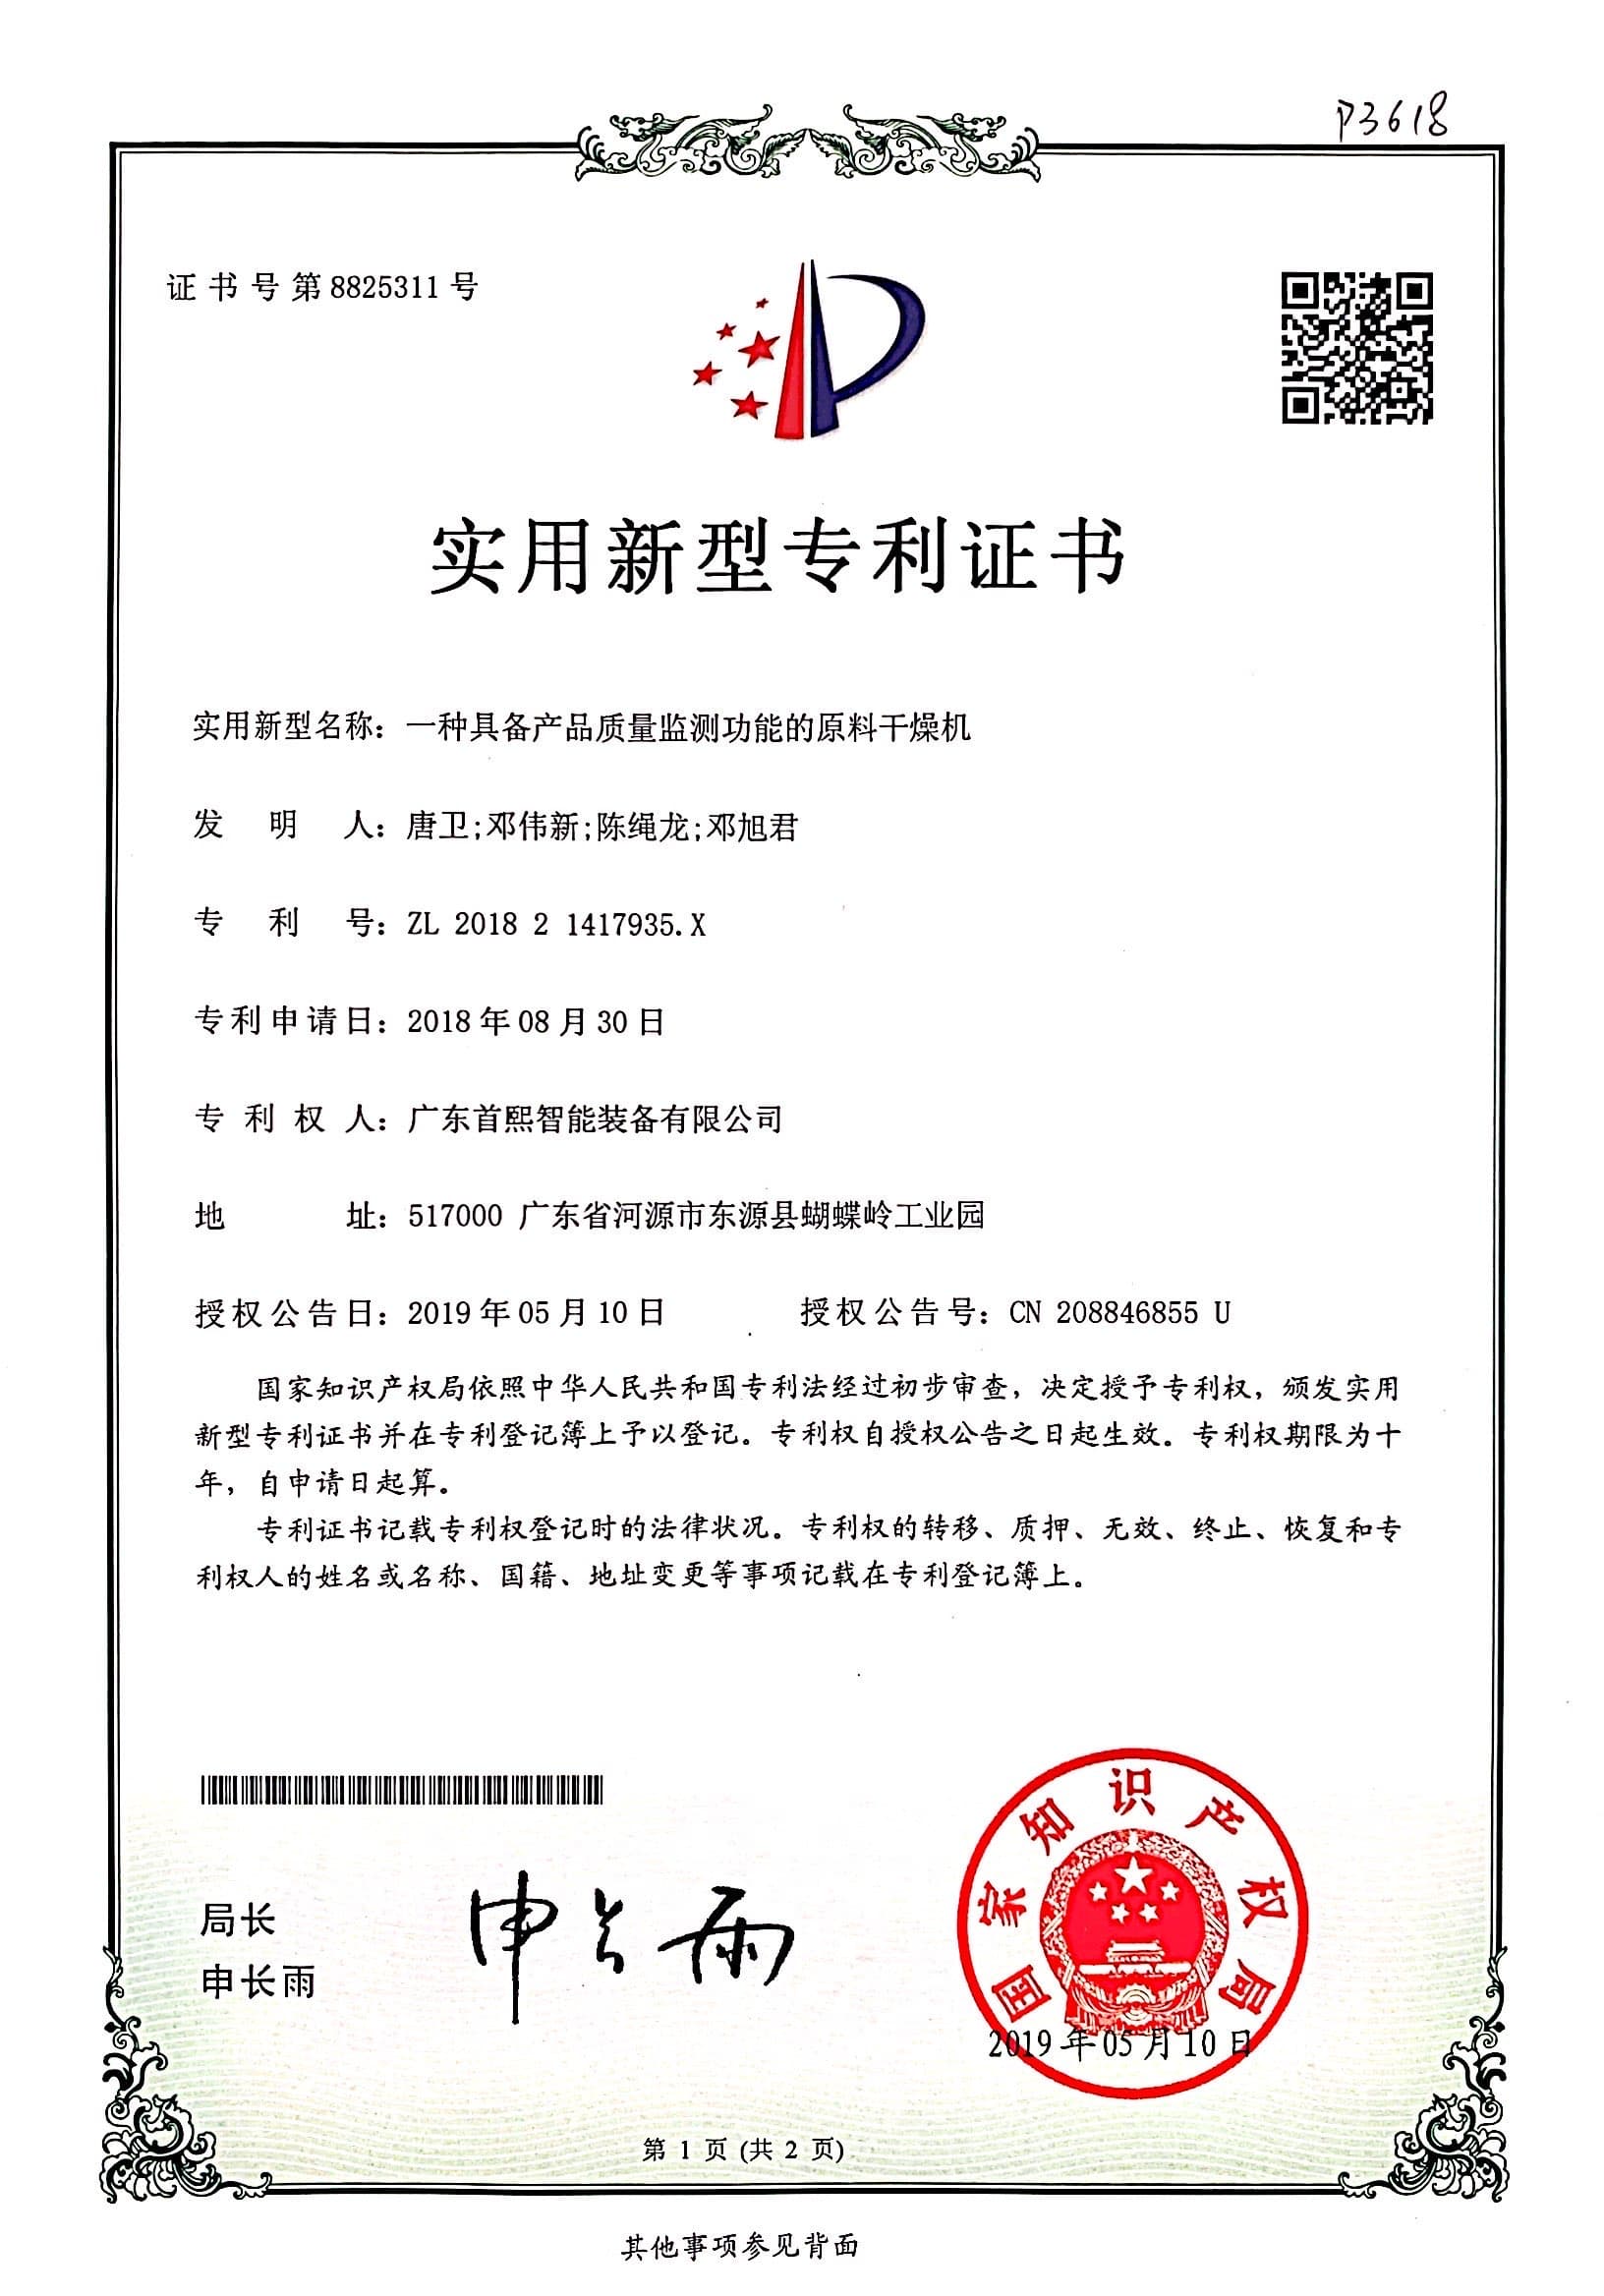 Utility Model Patent Certificate For Raw Material Dryer